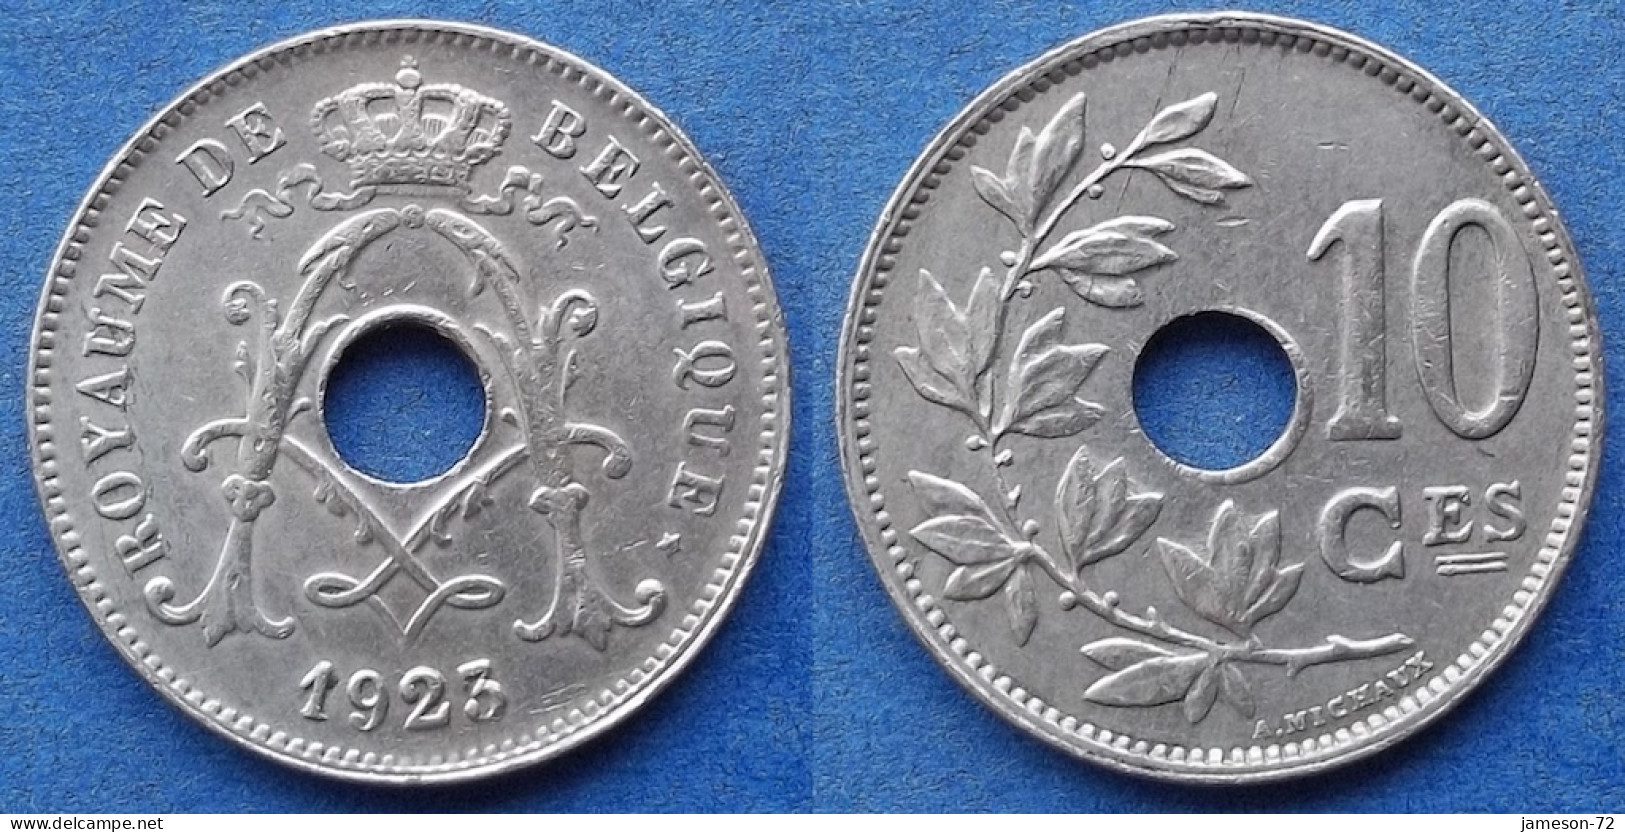 BELGIUM - 10 Centimes 1923 French KM# 85.1 Albert I (1909-34) - Edelweiss Coins - 10 Centimes